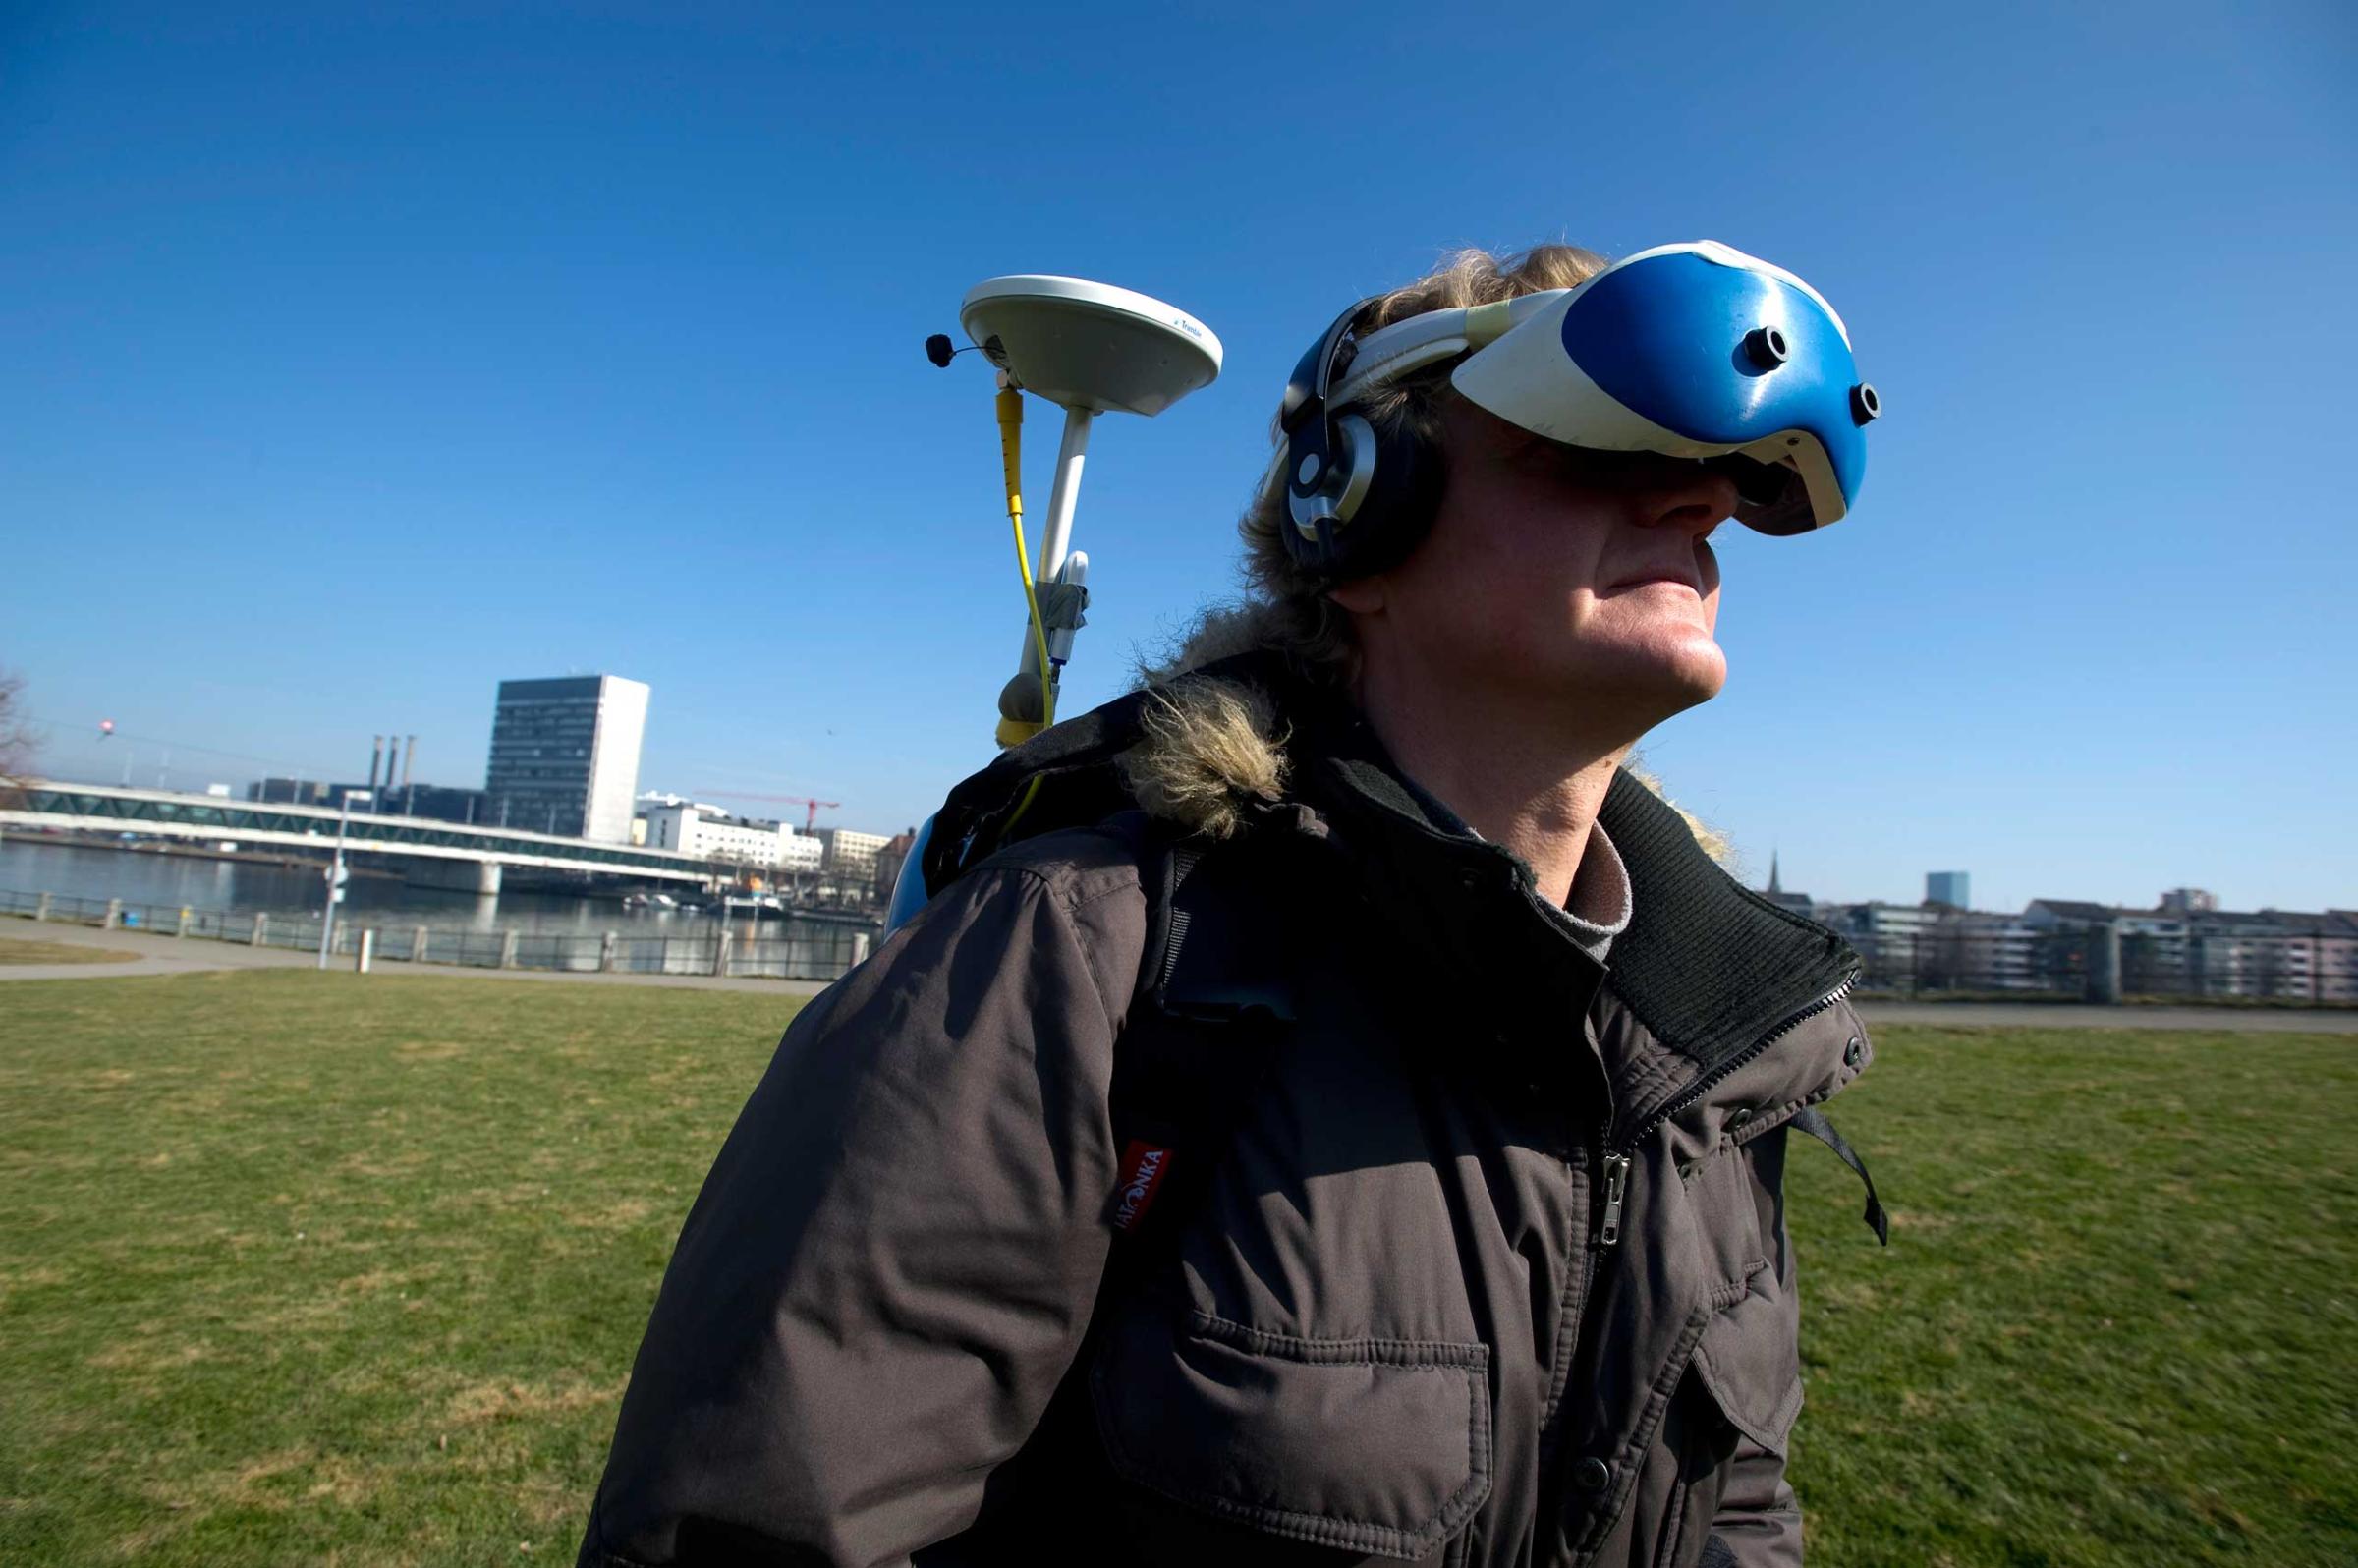 Peter Kenny Jan Torpus, director of Lifeclipper project, tested the immersive augmented reality equipment in St Johanns Park in Basel, Switzerland.